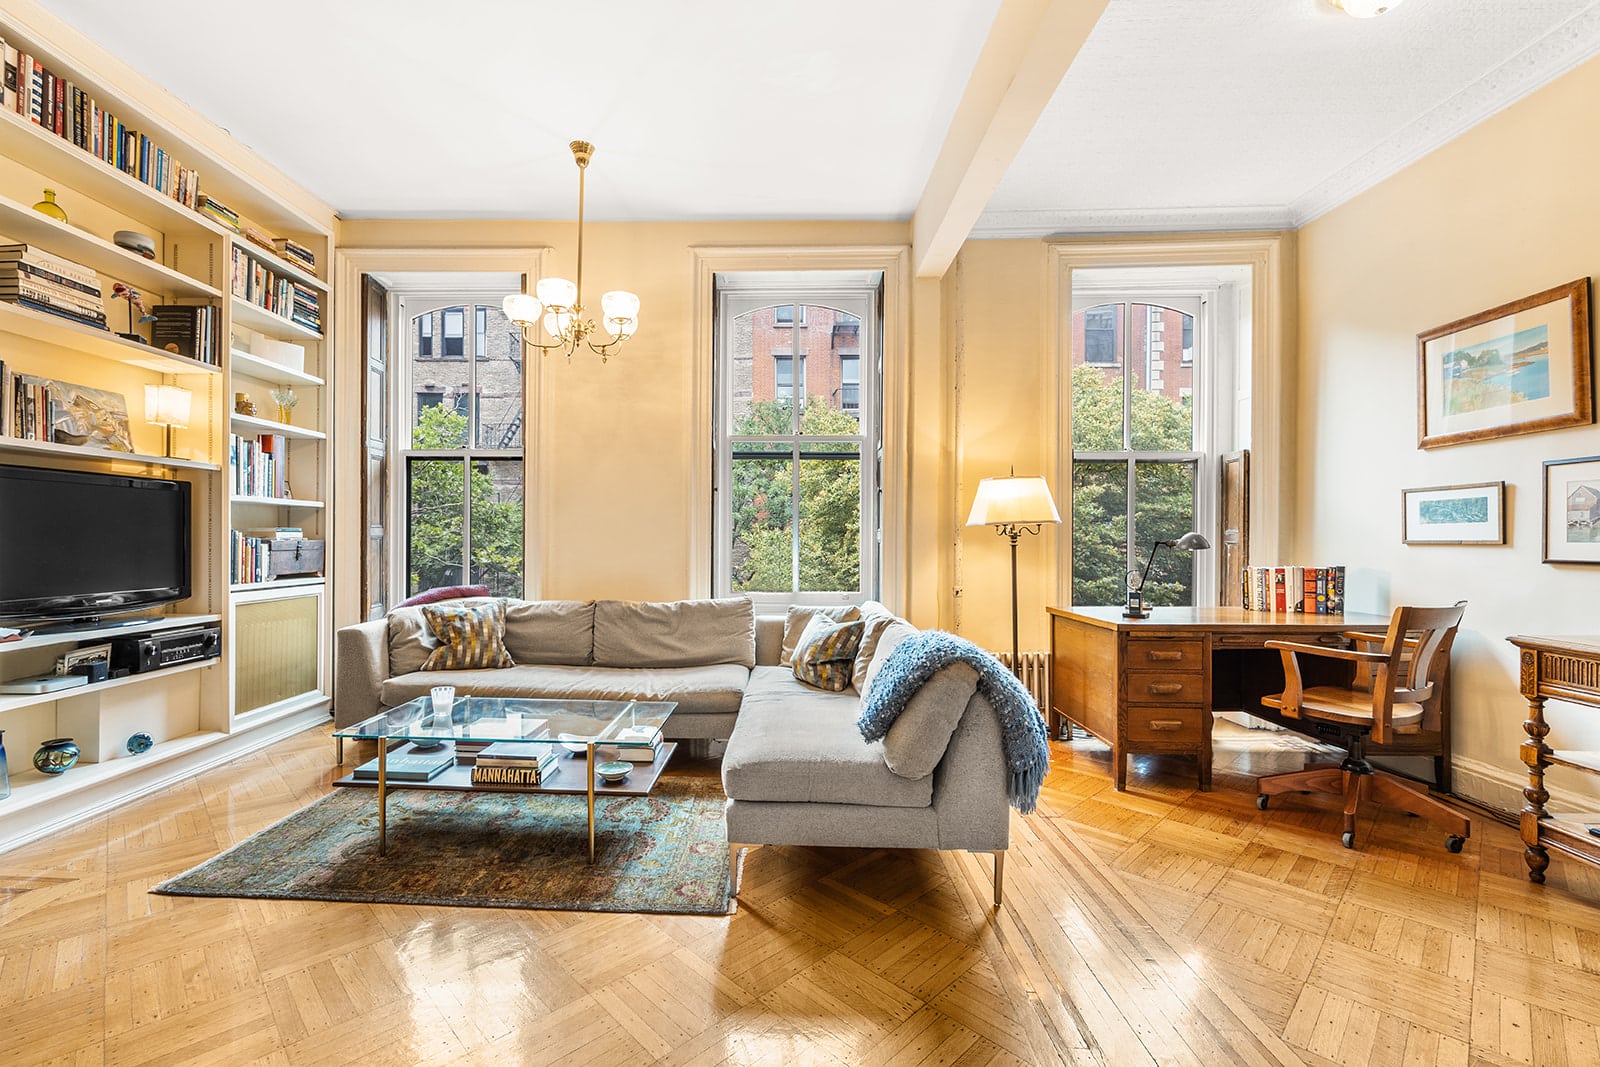 2 Bedroom Brownstone in Cobble Hill